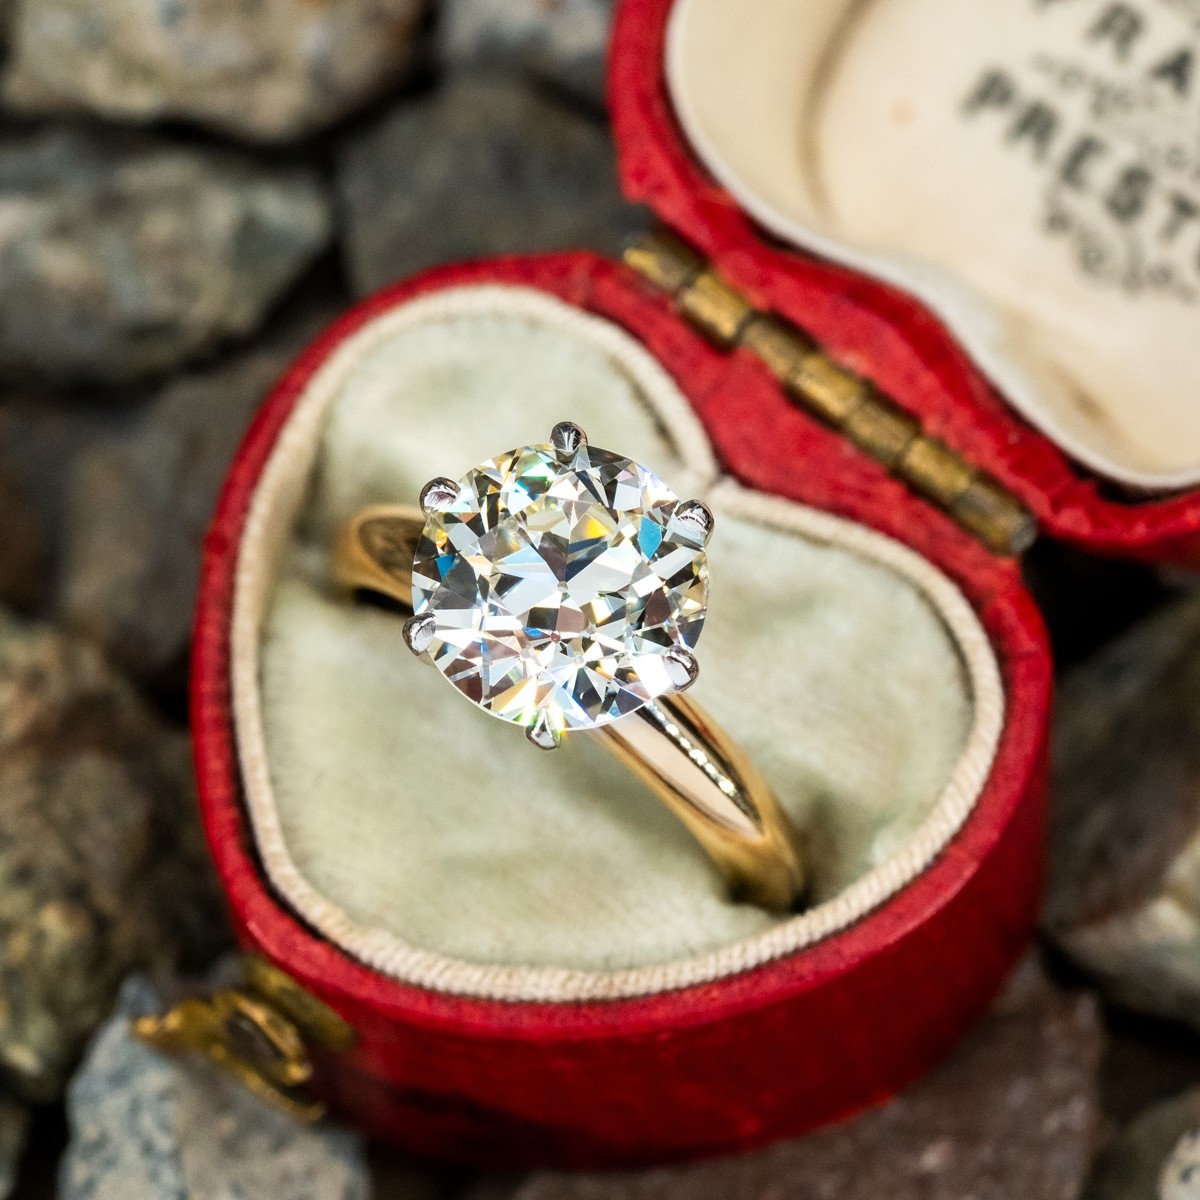 Which settings are perfect for a 3ct diamond ring? - BAUNAT